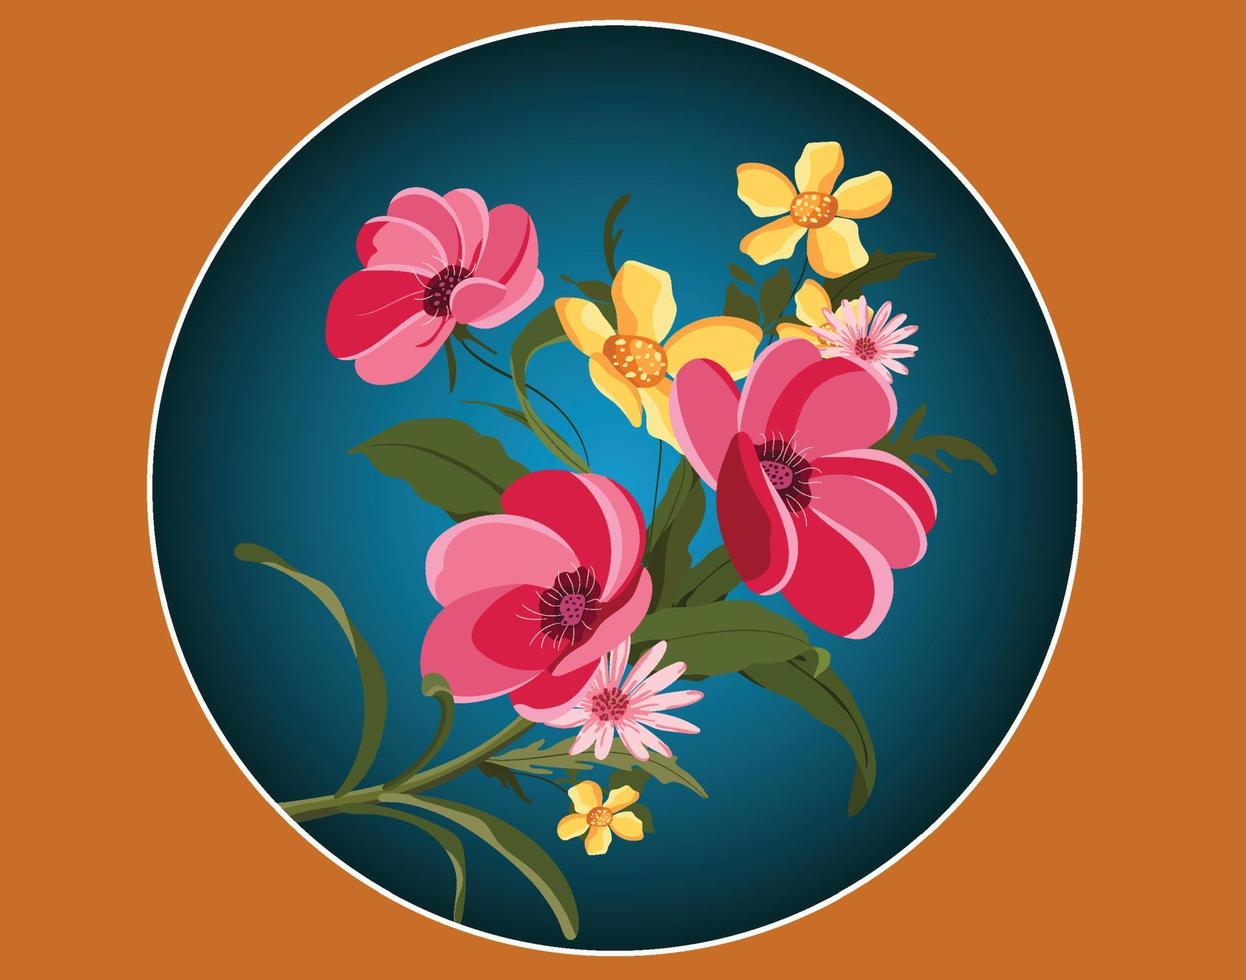 flowers painting colorful classical blooming sketch in circle vector